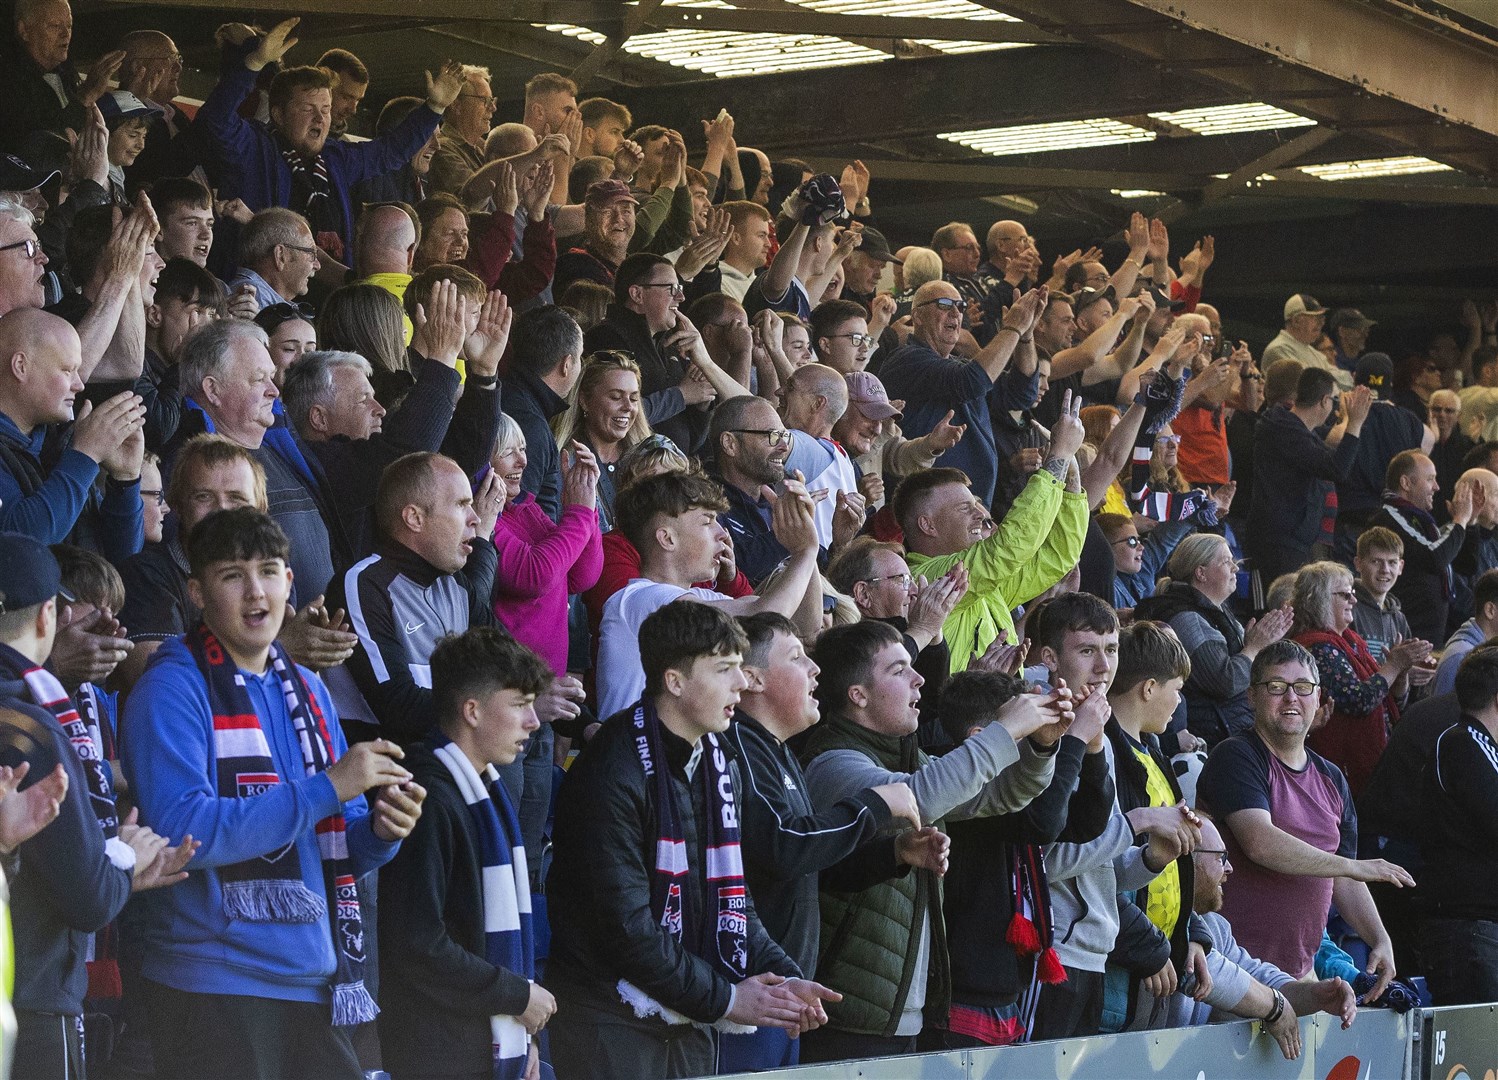 An official Ross County Supporters Club has returned.